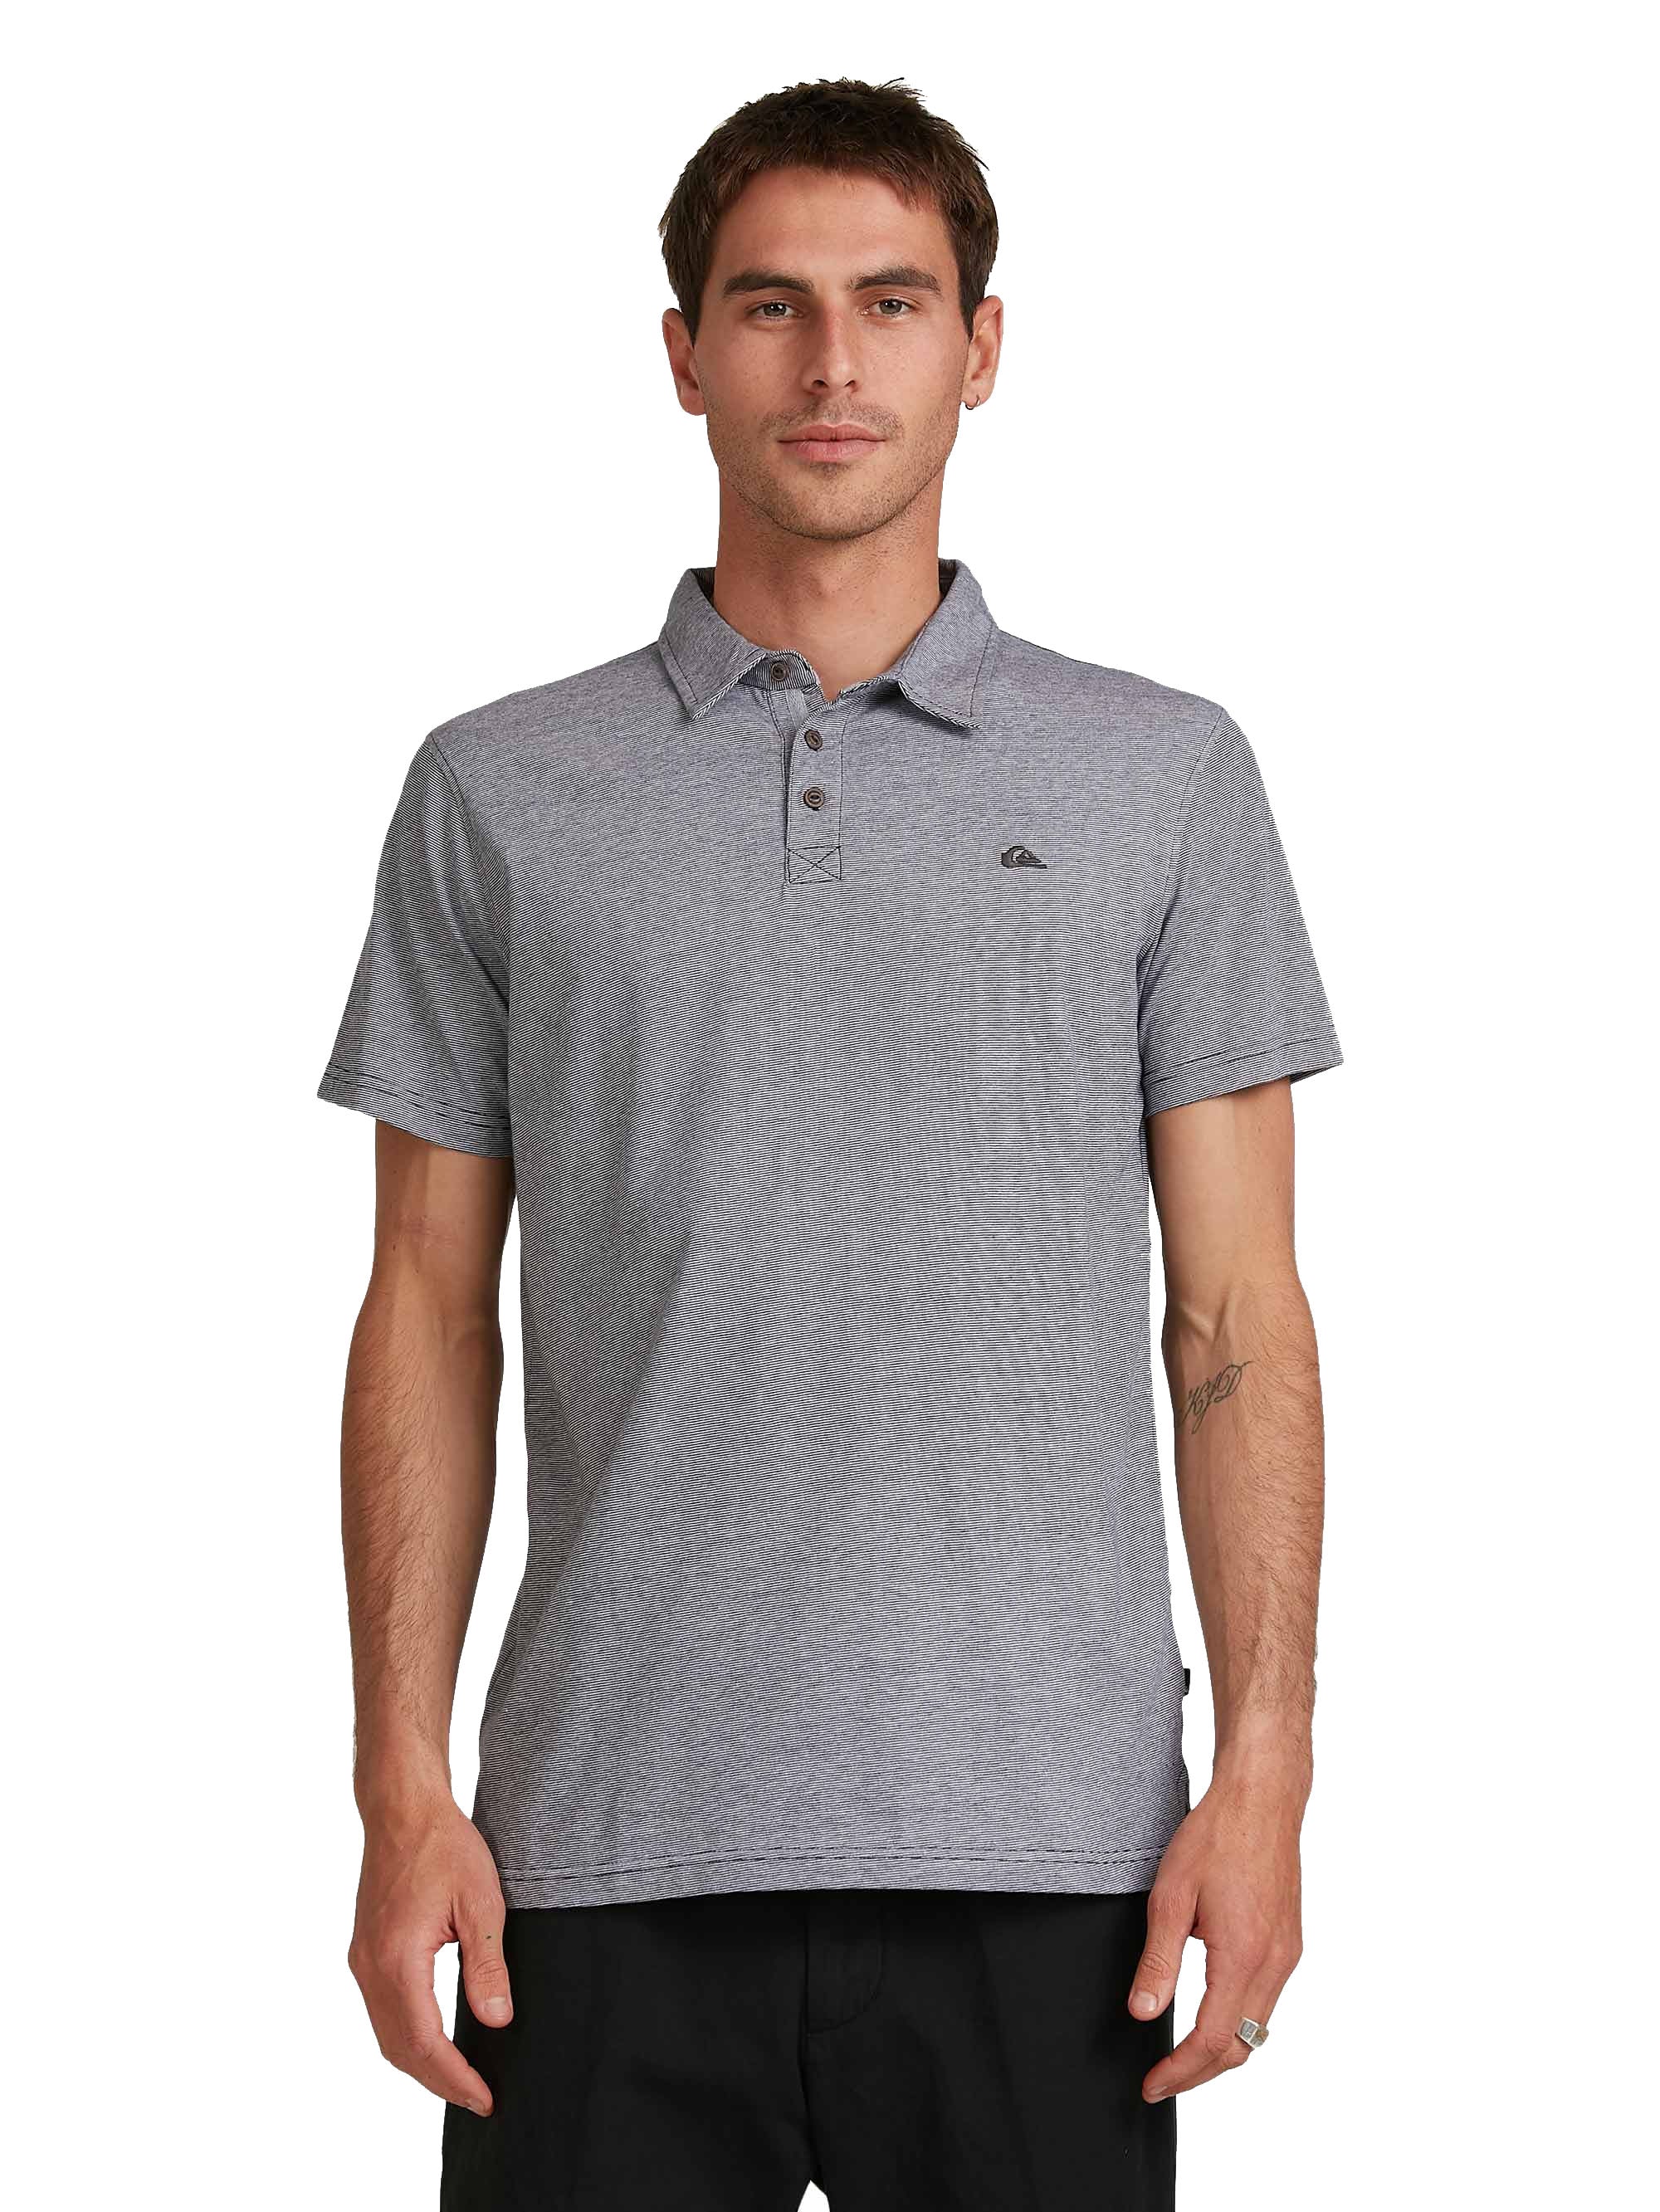 Quiksilver Everyday SunCruise Mens Polo BYP0 M